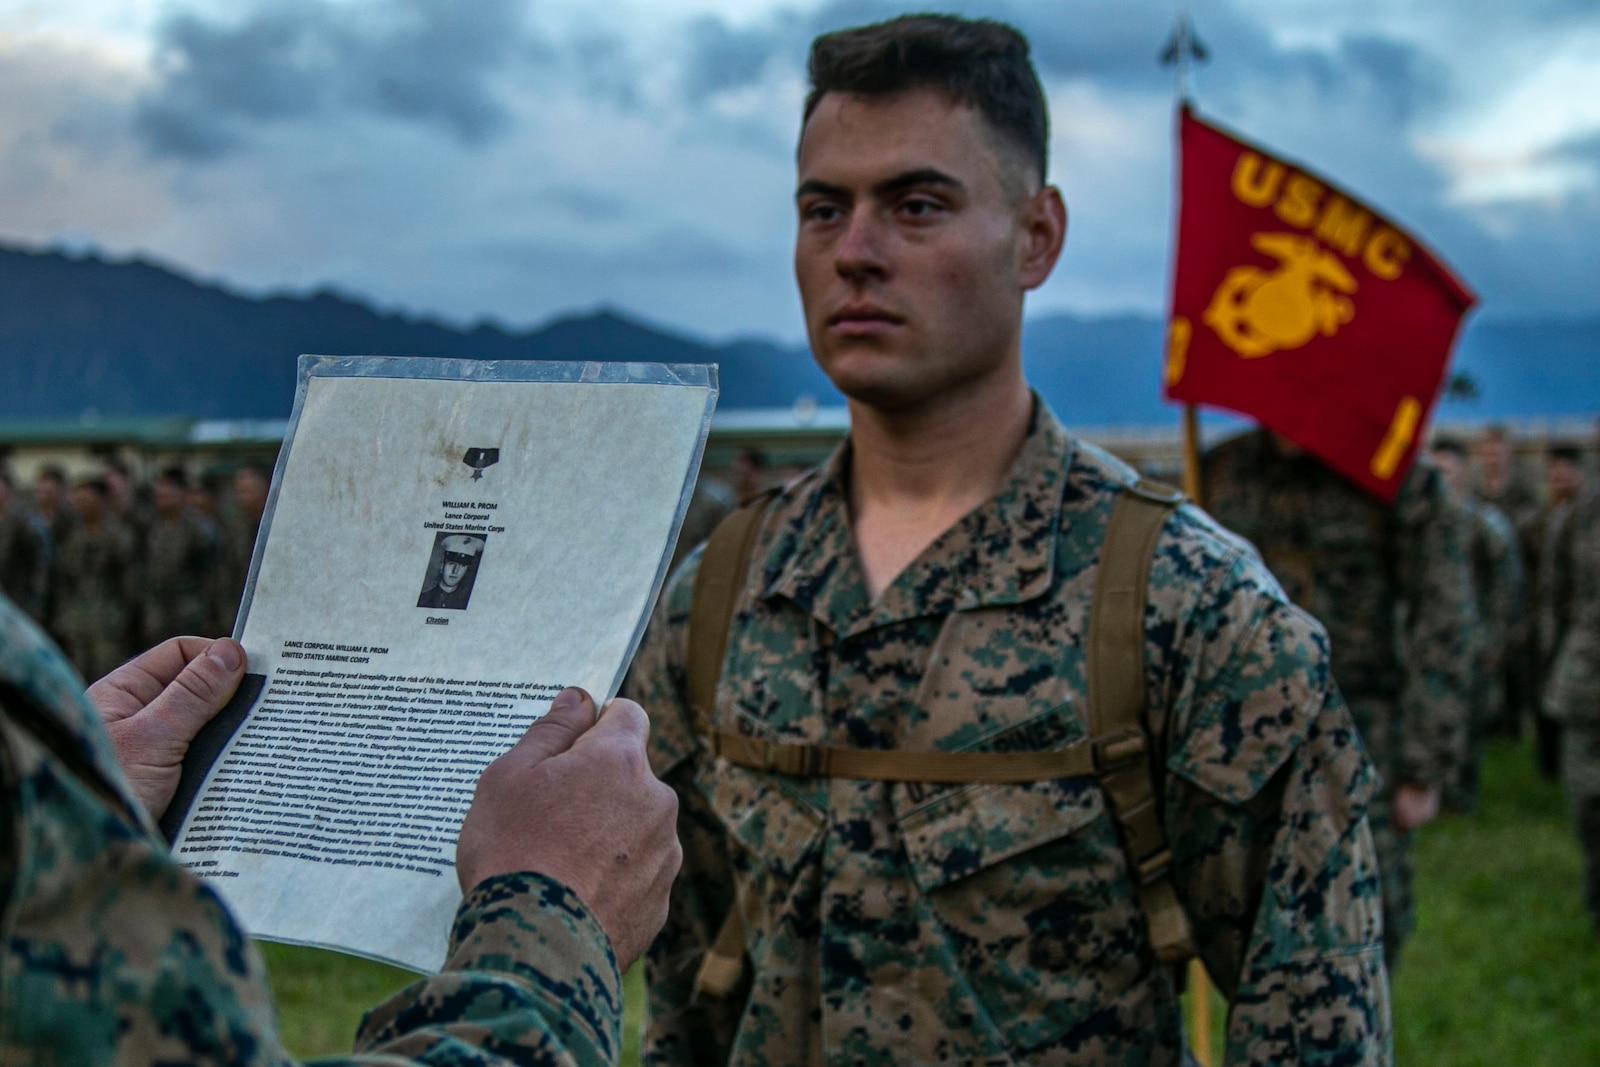 U.S. Marine Corps Lance Cpl. Ryan Smith, machine gunner, India Company, 3rd Battalion, 3rd Marine Regiment, is awarded the citation of Lance Cpl. William R. Prom for excellent service on Marine Corps Base Hawaii, Feb. 10, 2020. Lance Cpl. Prom was with the unit when his actions in Vietnam during Operation Taylor Common were awarded with the Medal of Honor. (U.S. Marine Corps photo by Lance Cpl. Jacob Wilson)